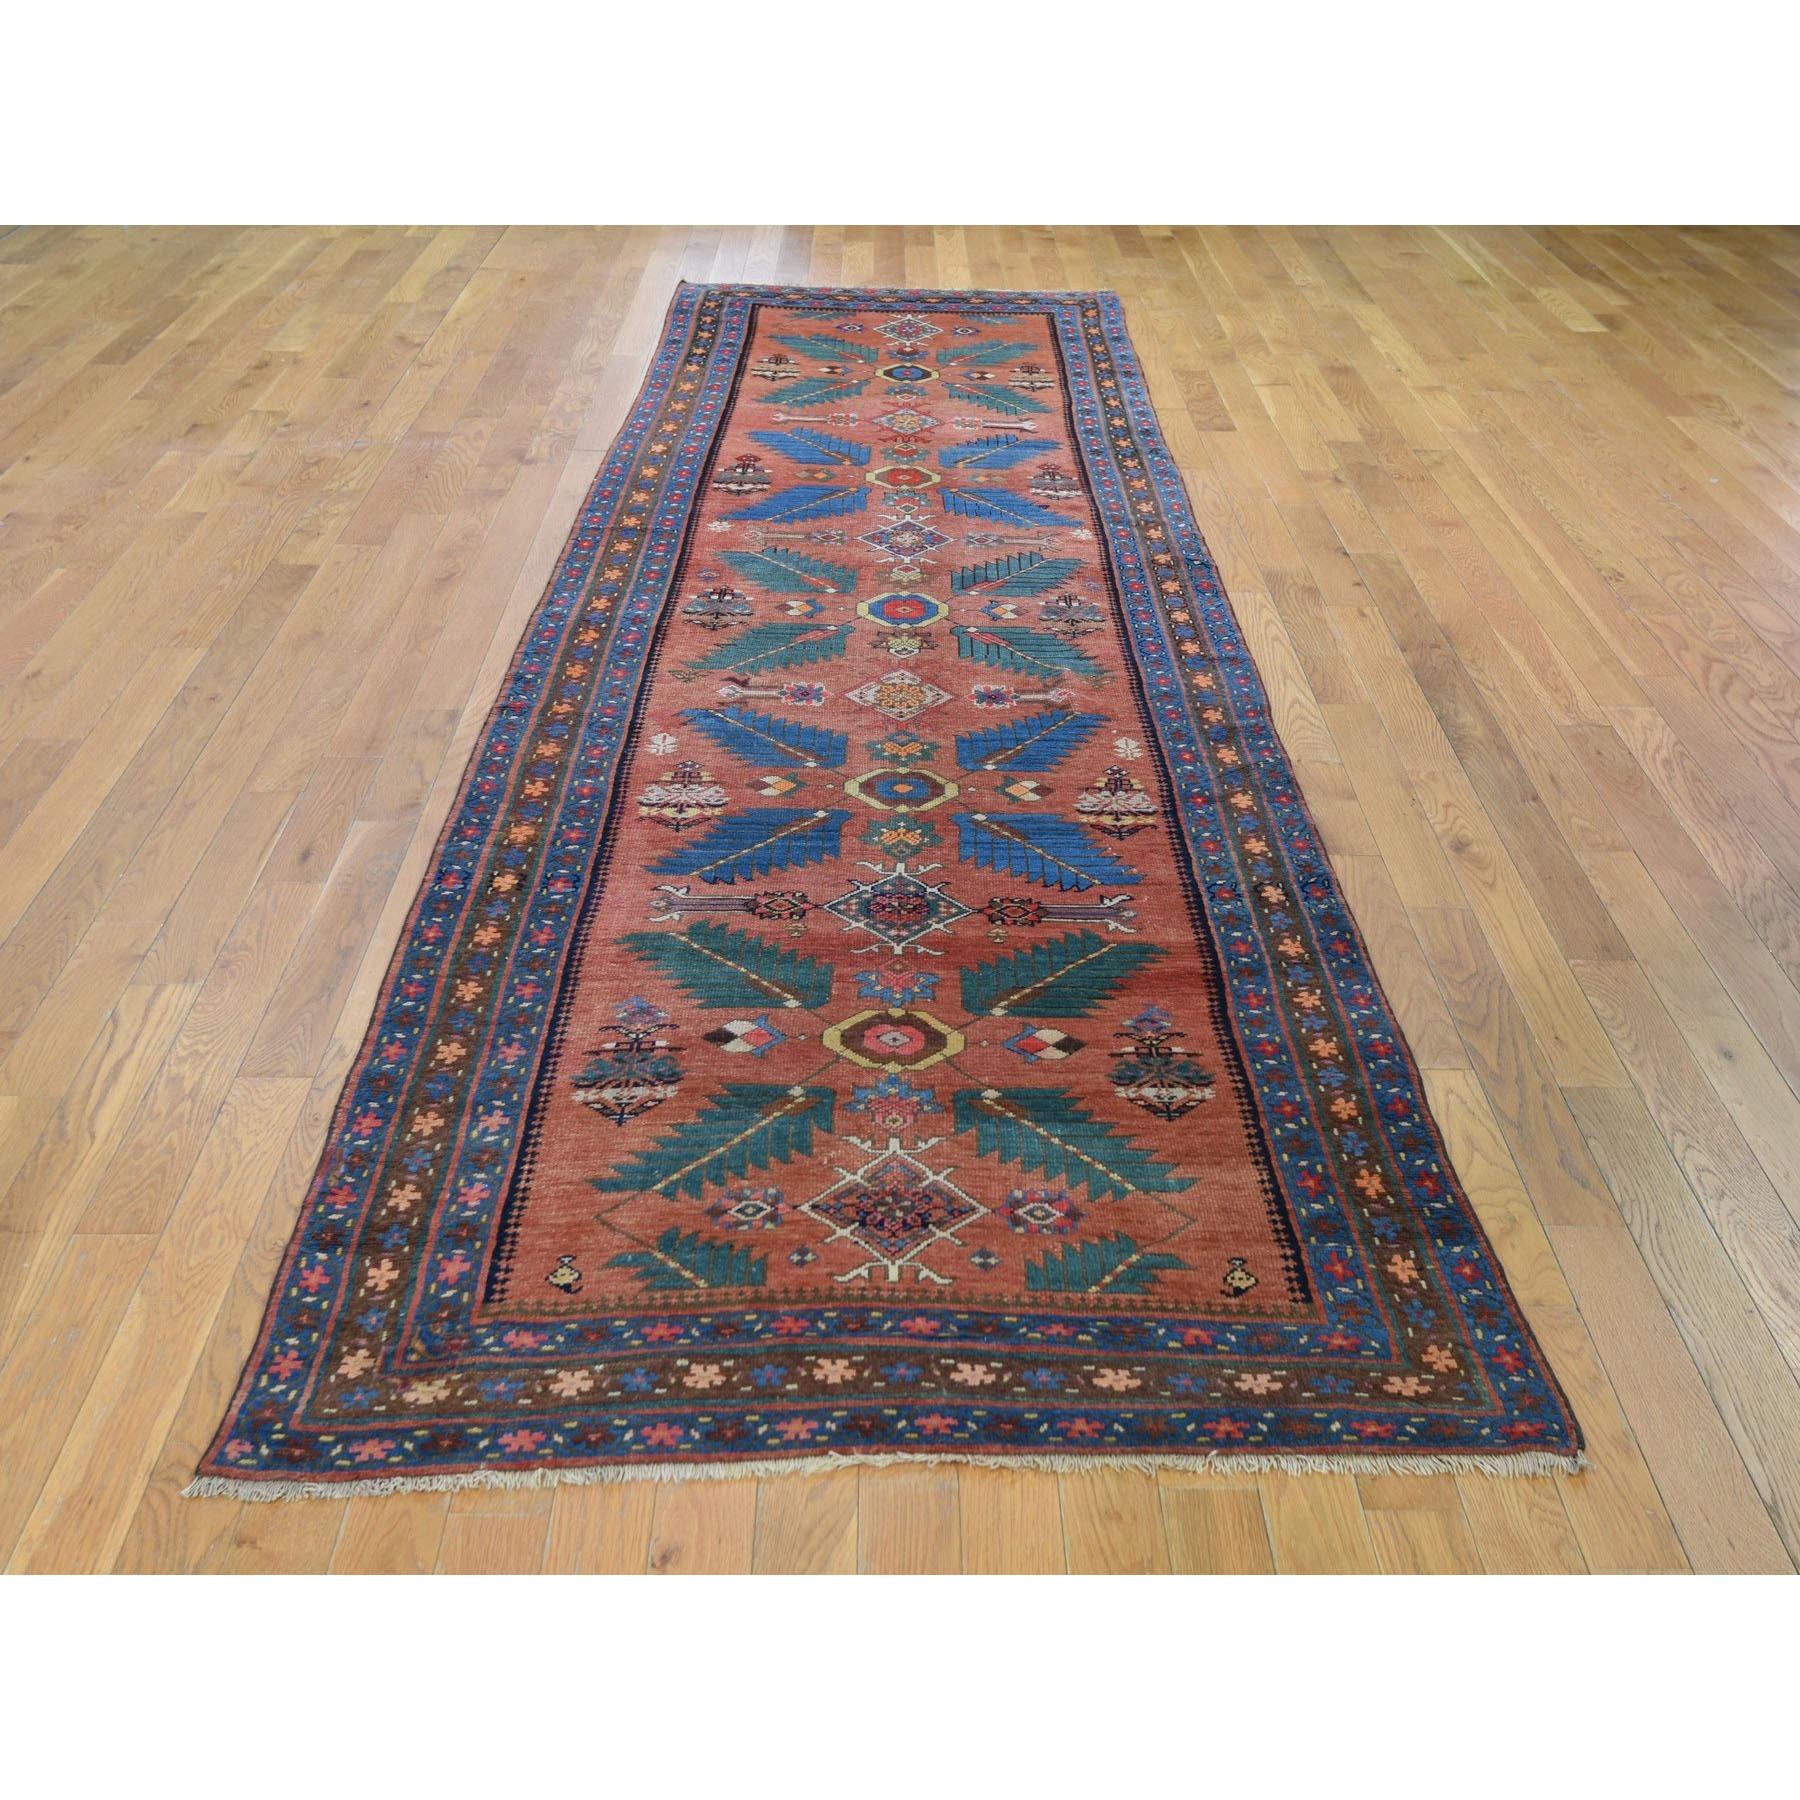 This is a truly genuine one-of-a-kind antique North west Persian wide runner very good condition rug. It has been knotted for months and months in the centuries-old Persian weaving craftsmanship techniques by expert artisans. 

Primary materials: